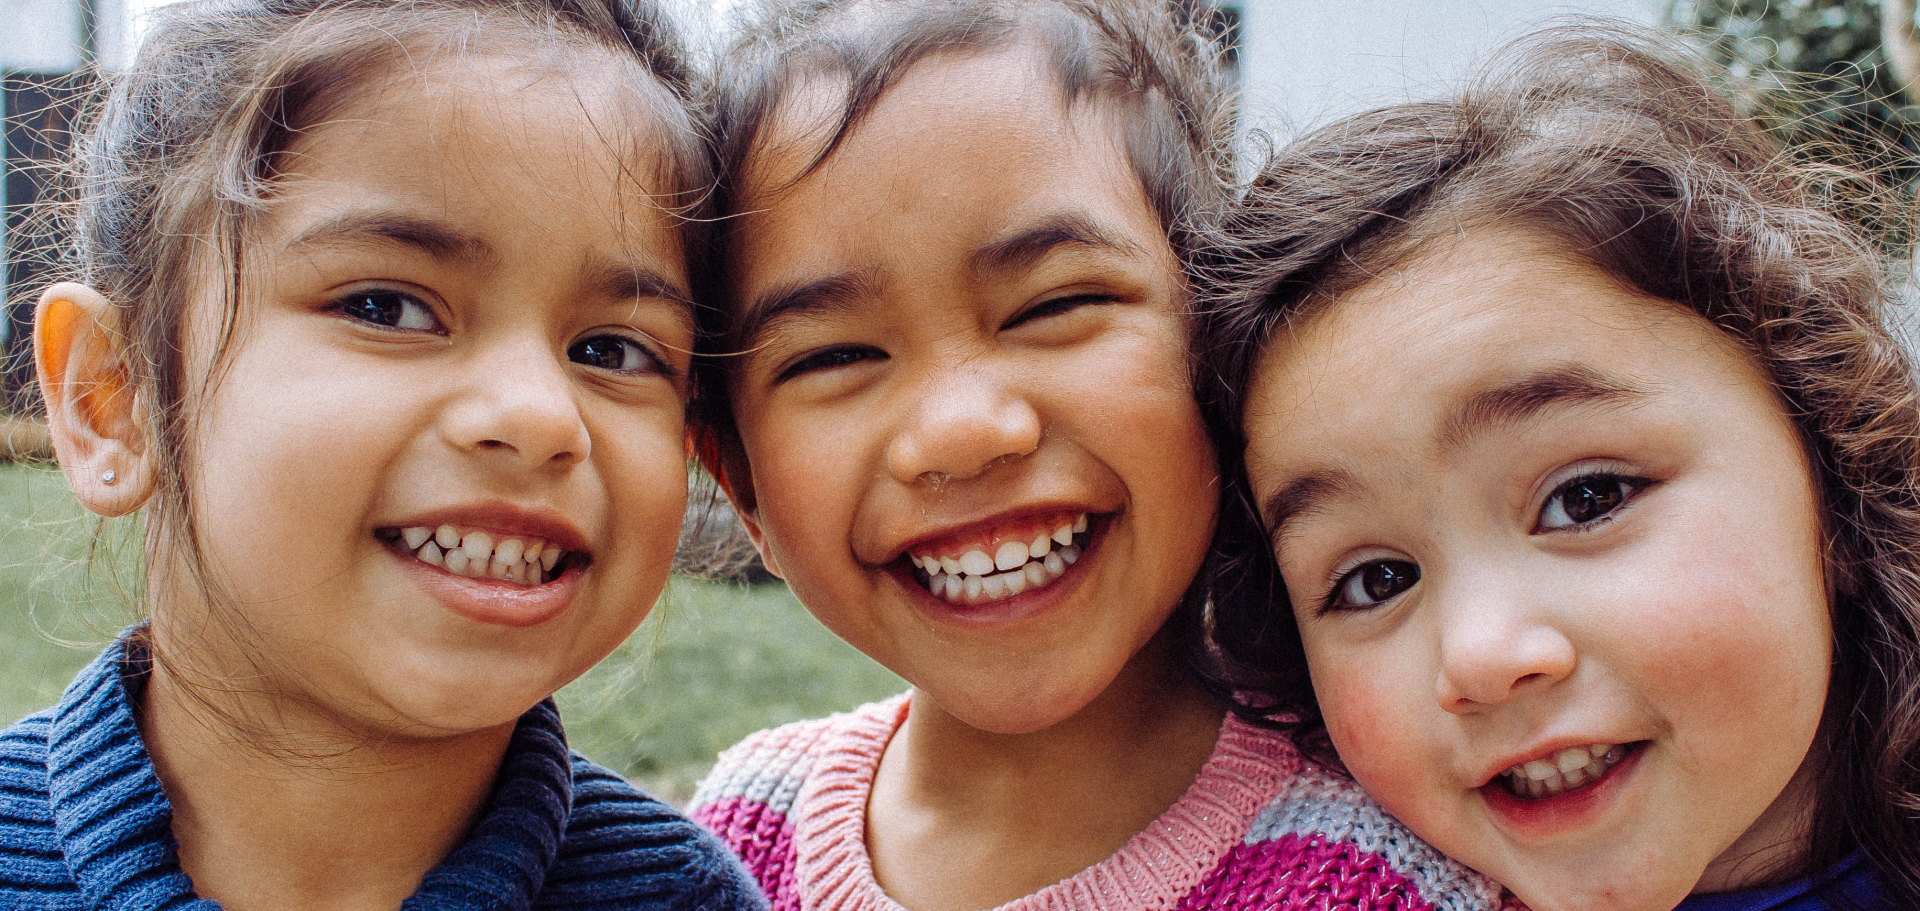 Three happy, smiling kids with their heads together.